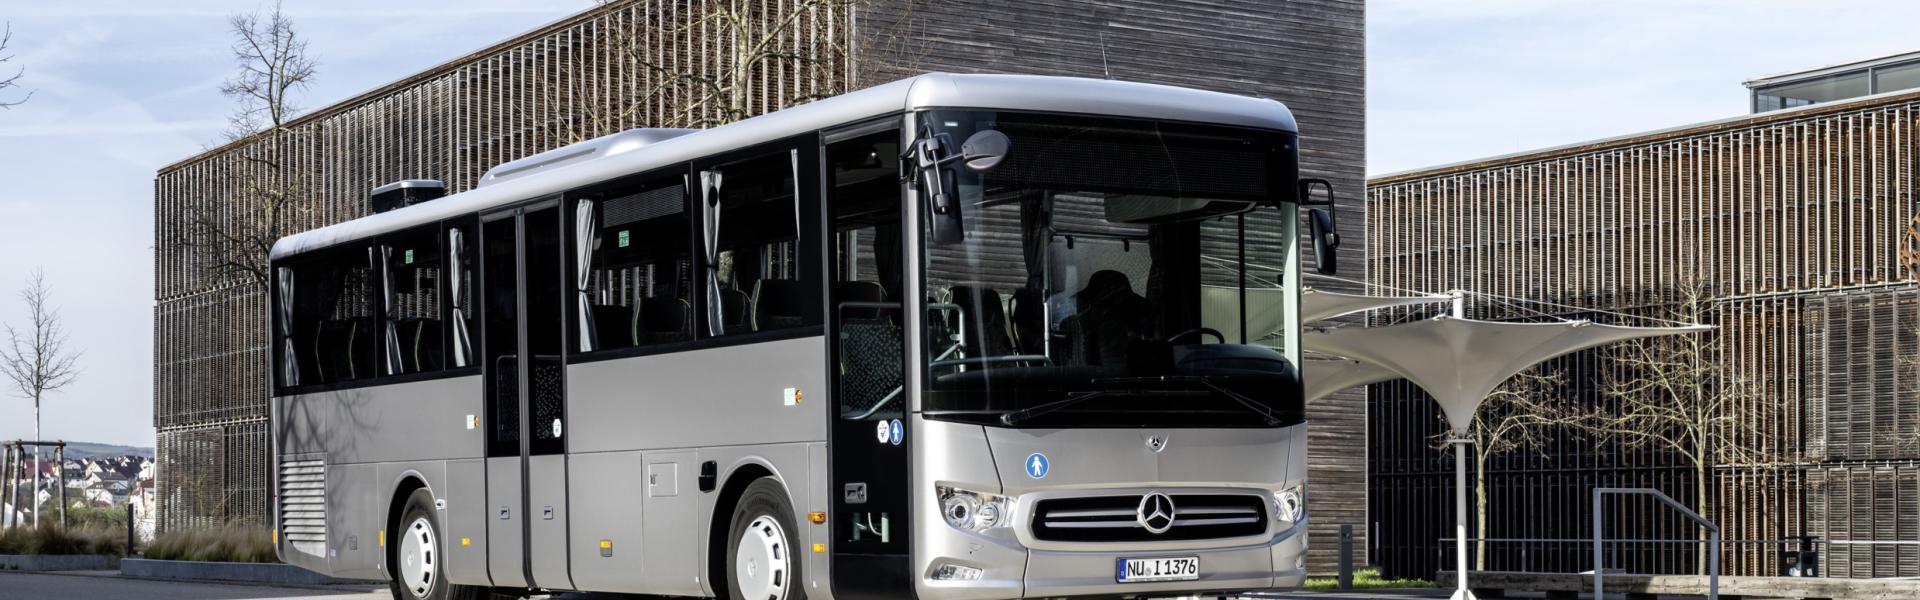 Mercedes-Benz Launches Compact Intouro K Hybrid